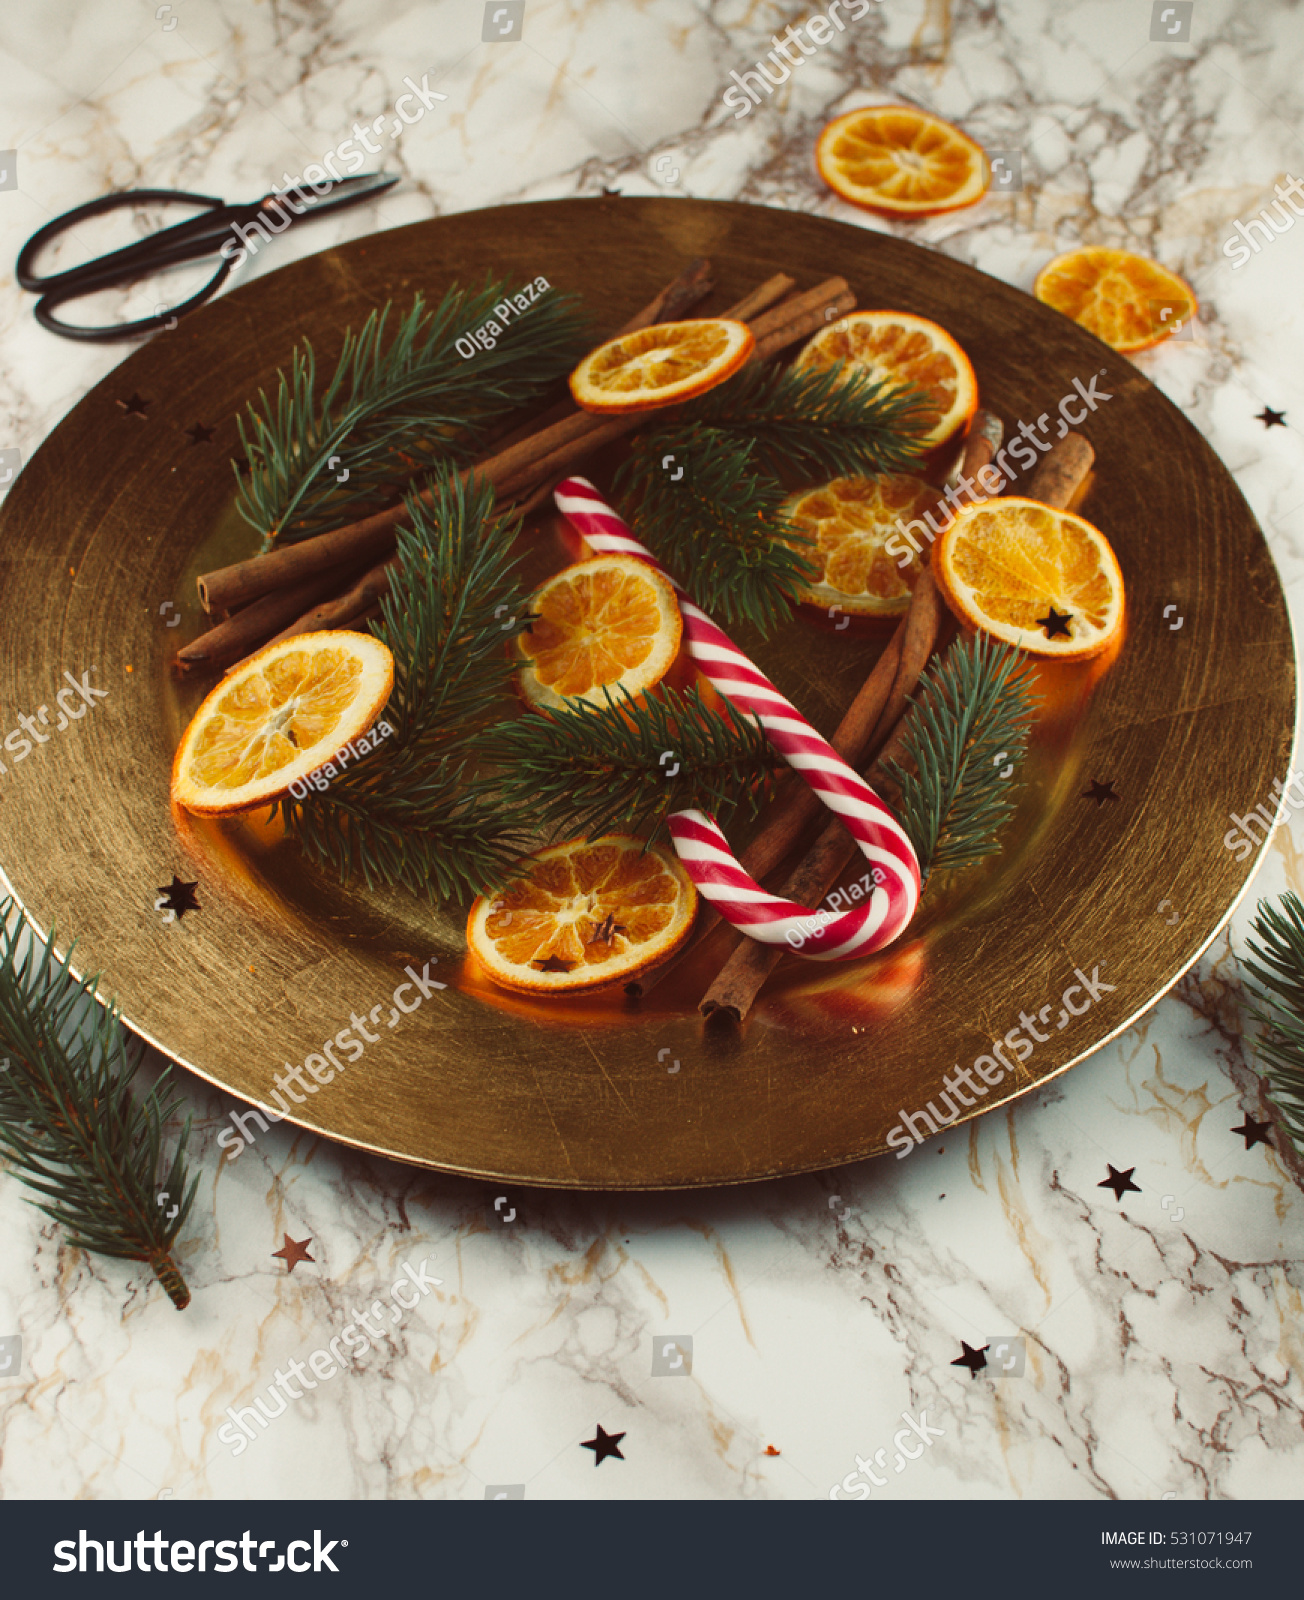 Golden, vintage, christmas decoration on a golden plate with dried oranges and sweets #531071947